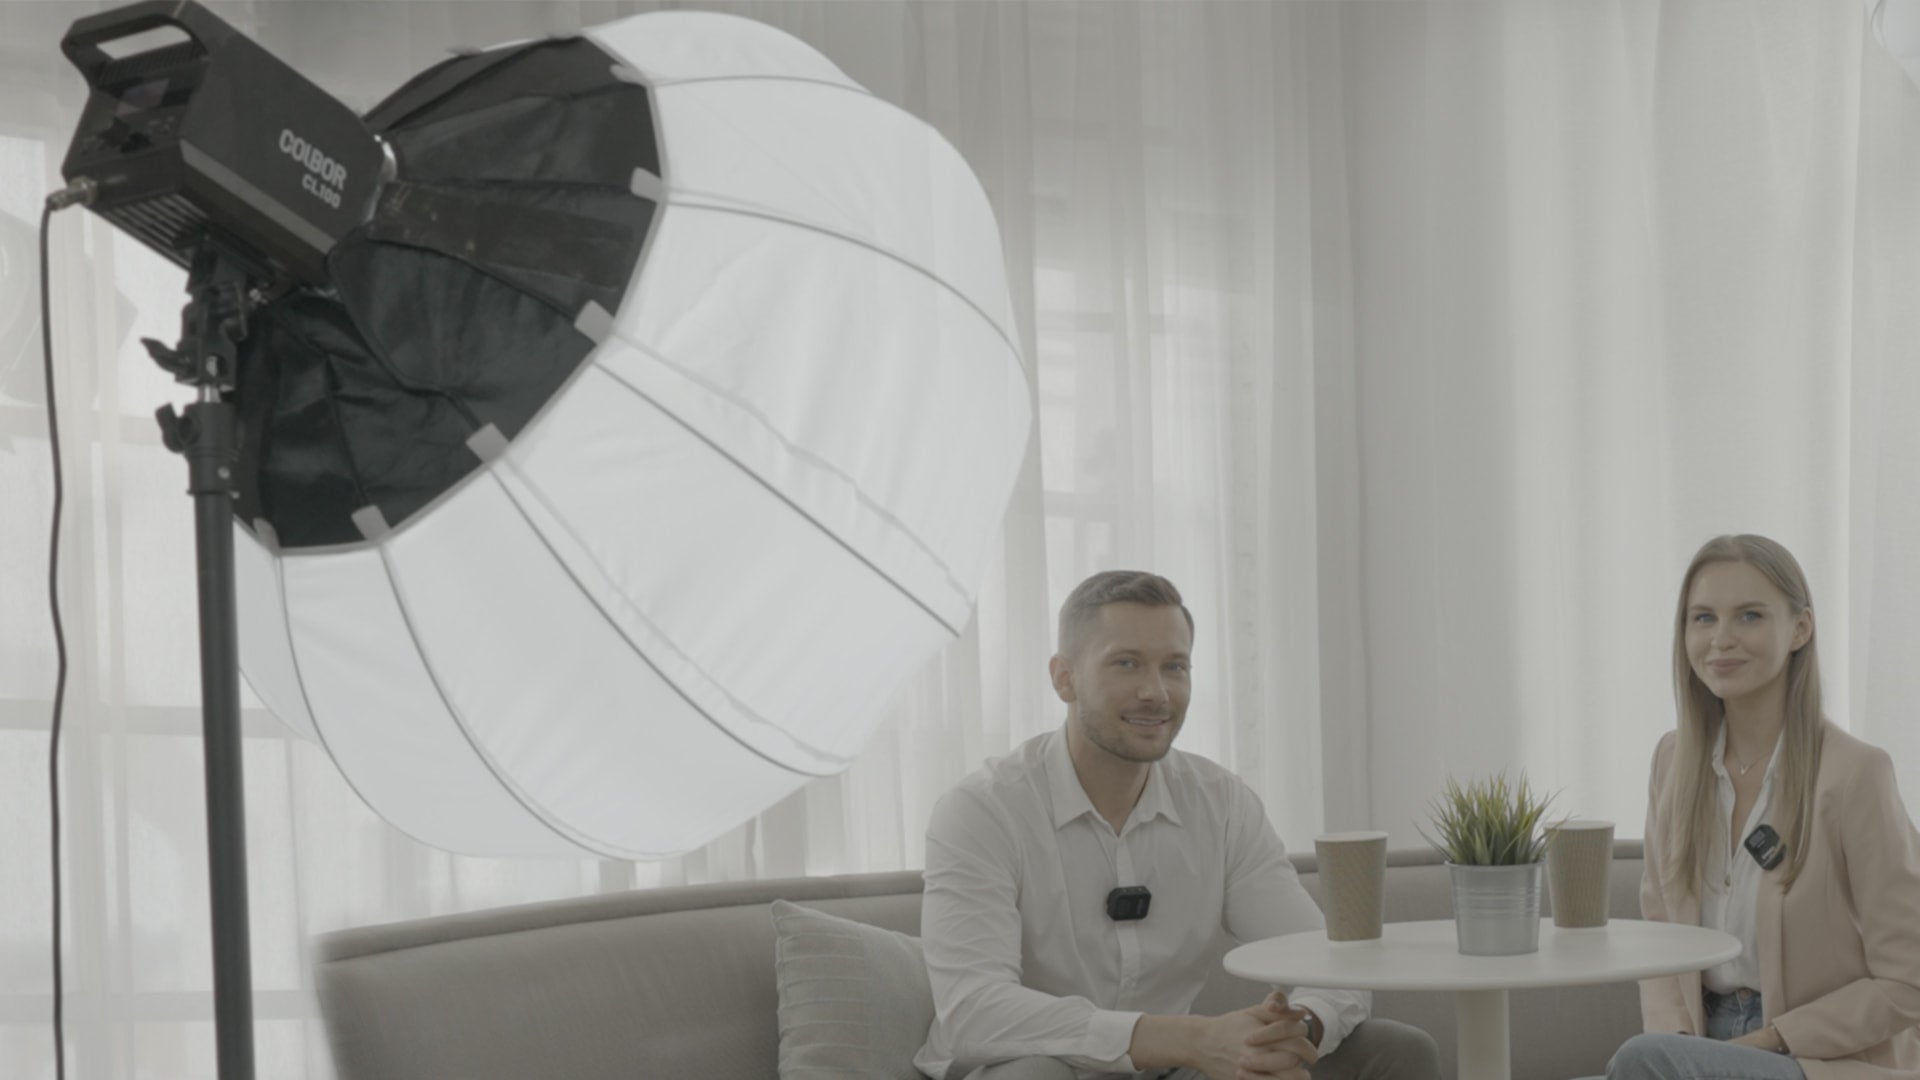 How to set up lighting for video interview?